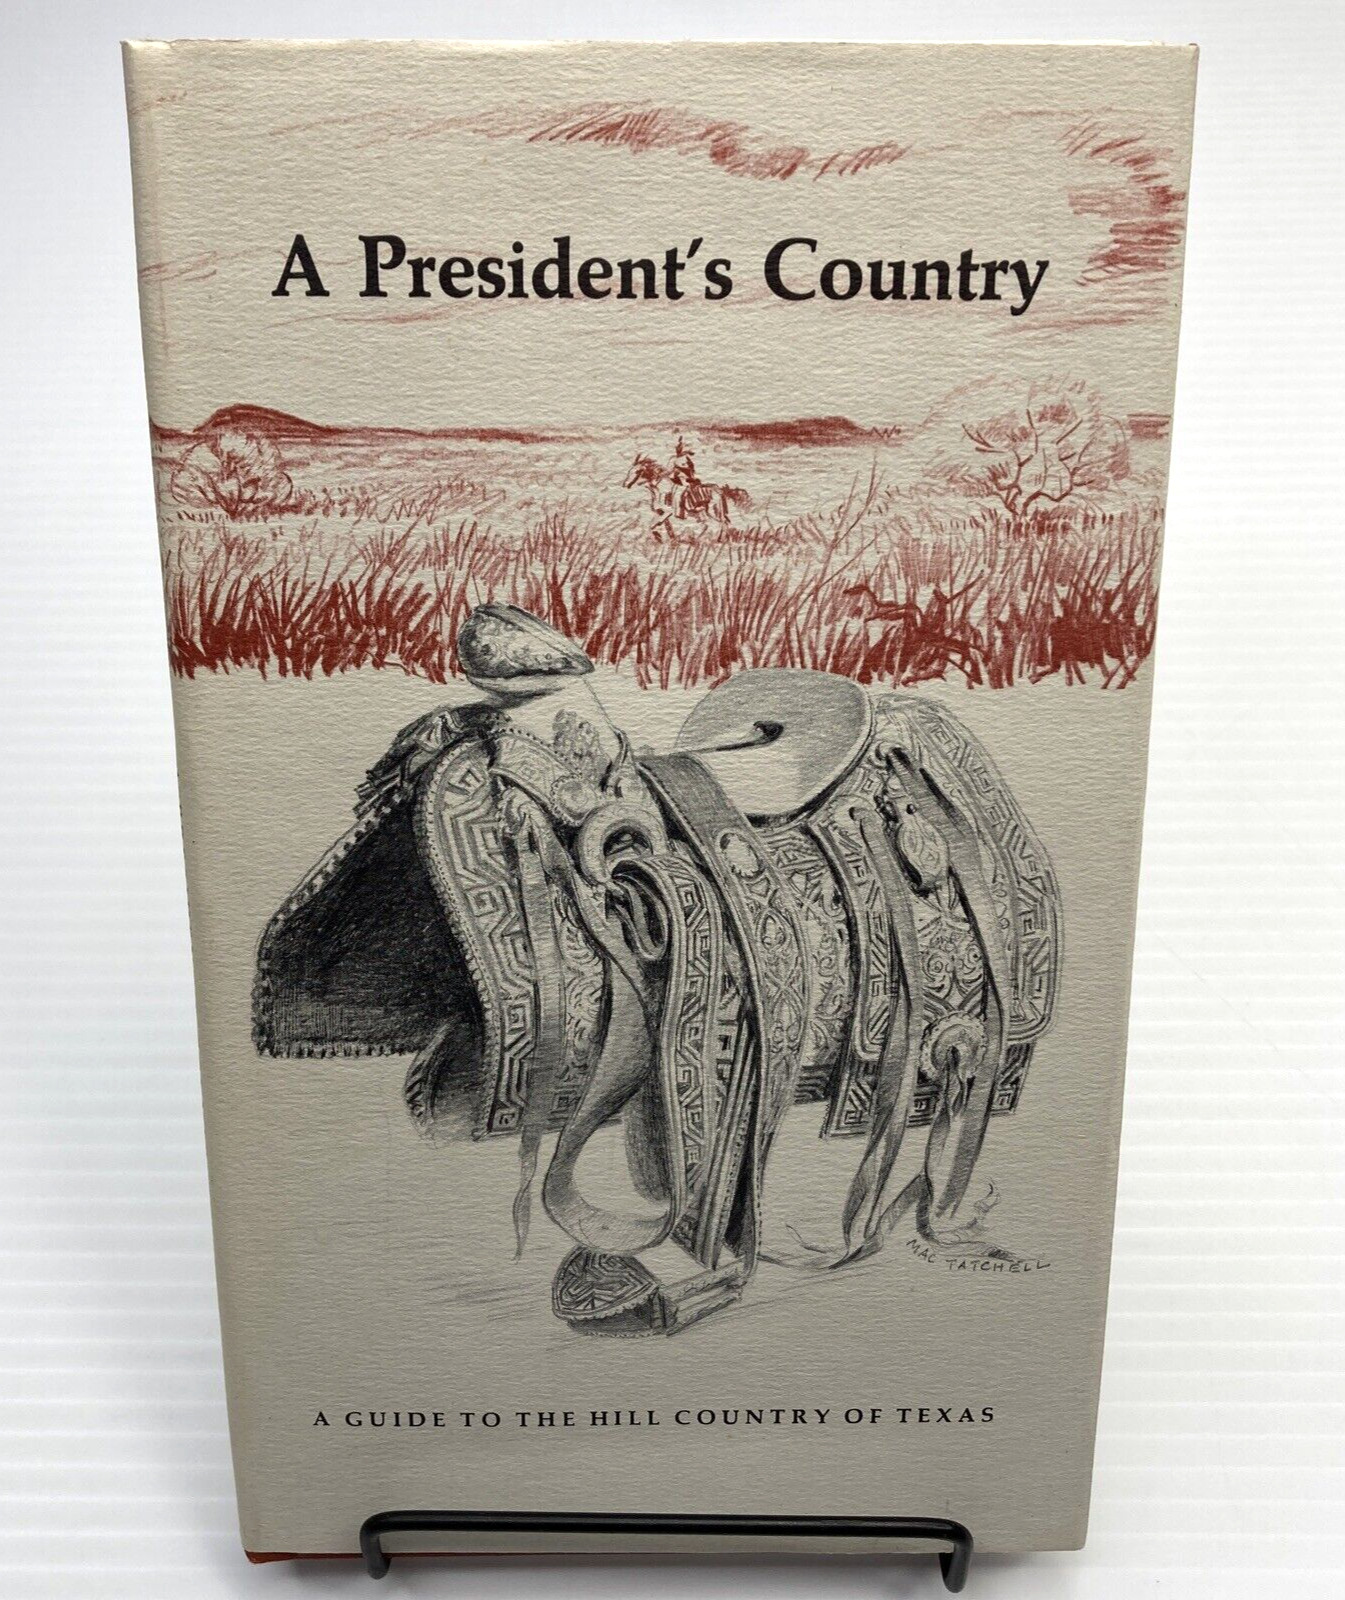 Vintage Texas Travel Guide Texas Hill Country Guide A President's Country 1964